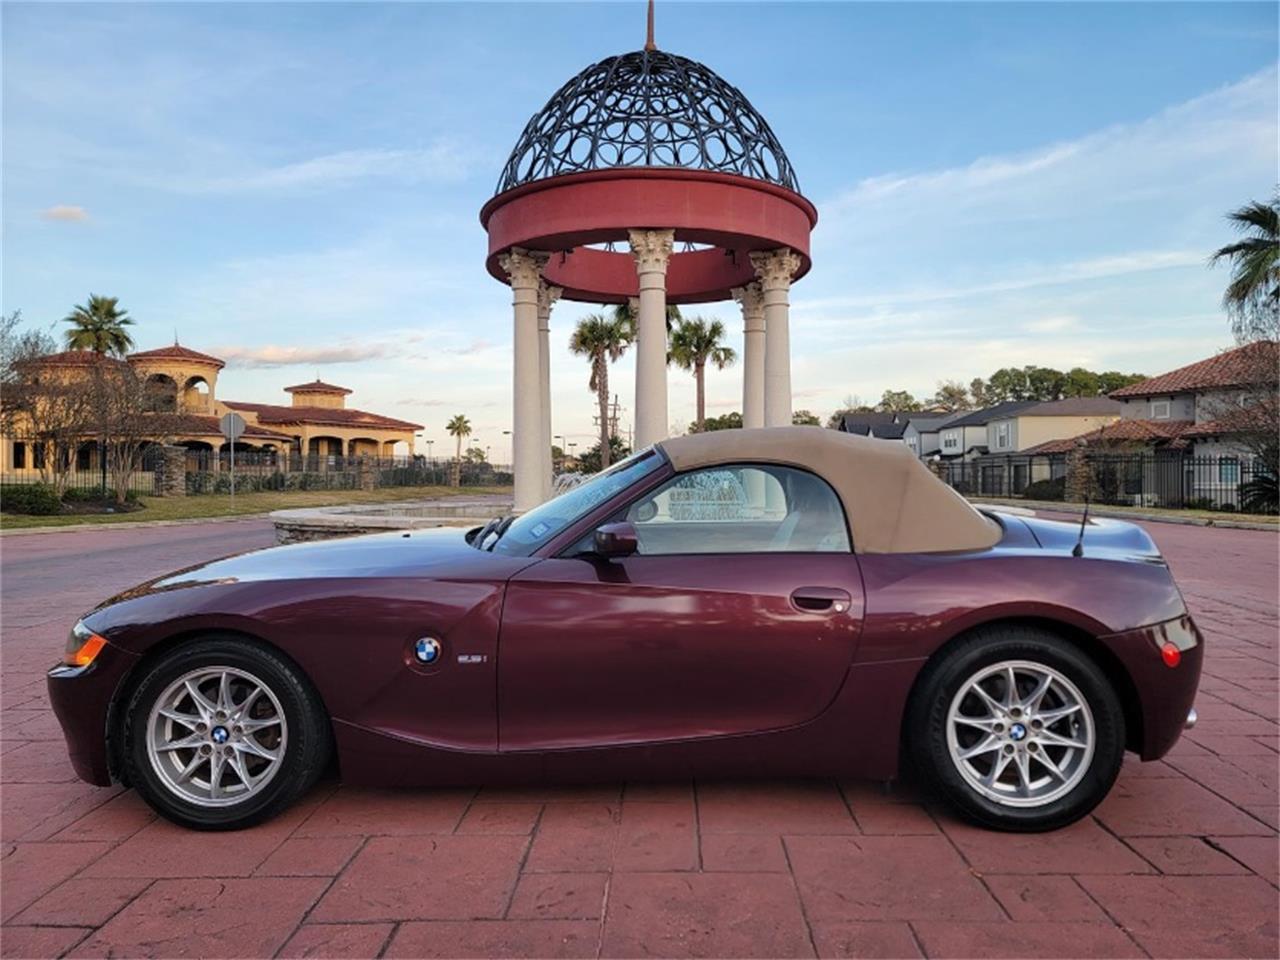 For Sale: 2003 BMW Z4 in Hobart, Indiana for sale in Hobart, IN